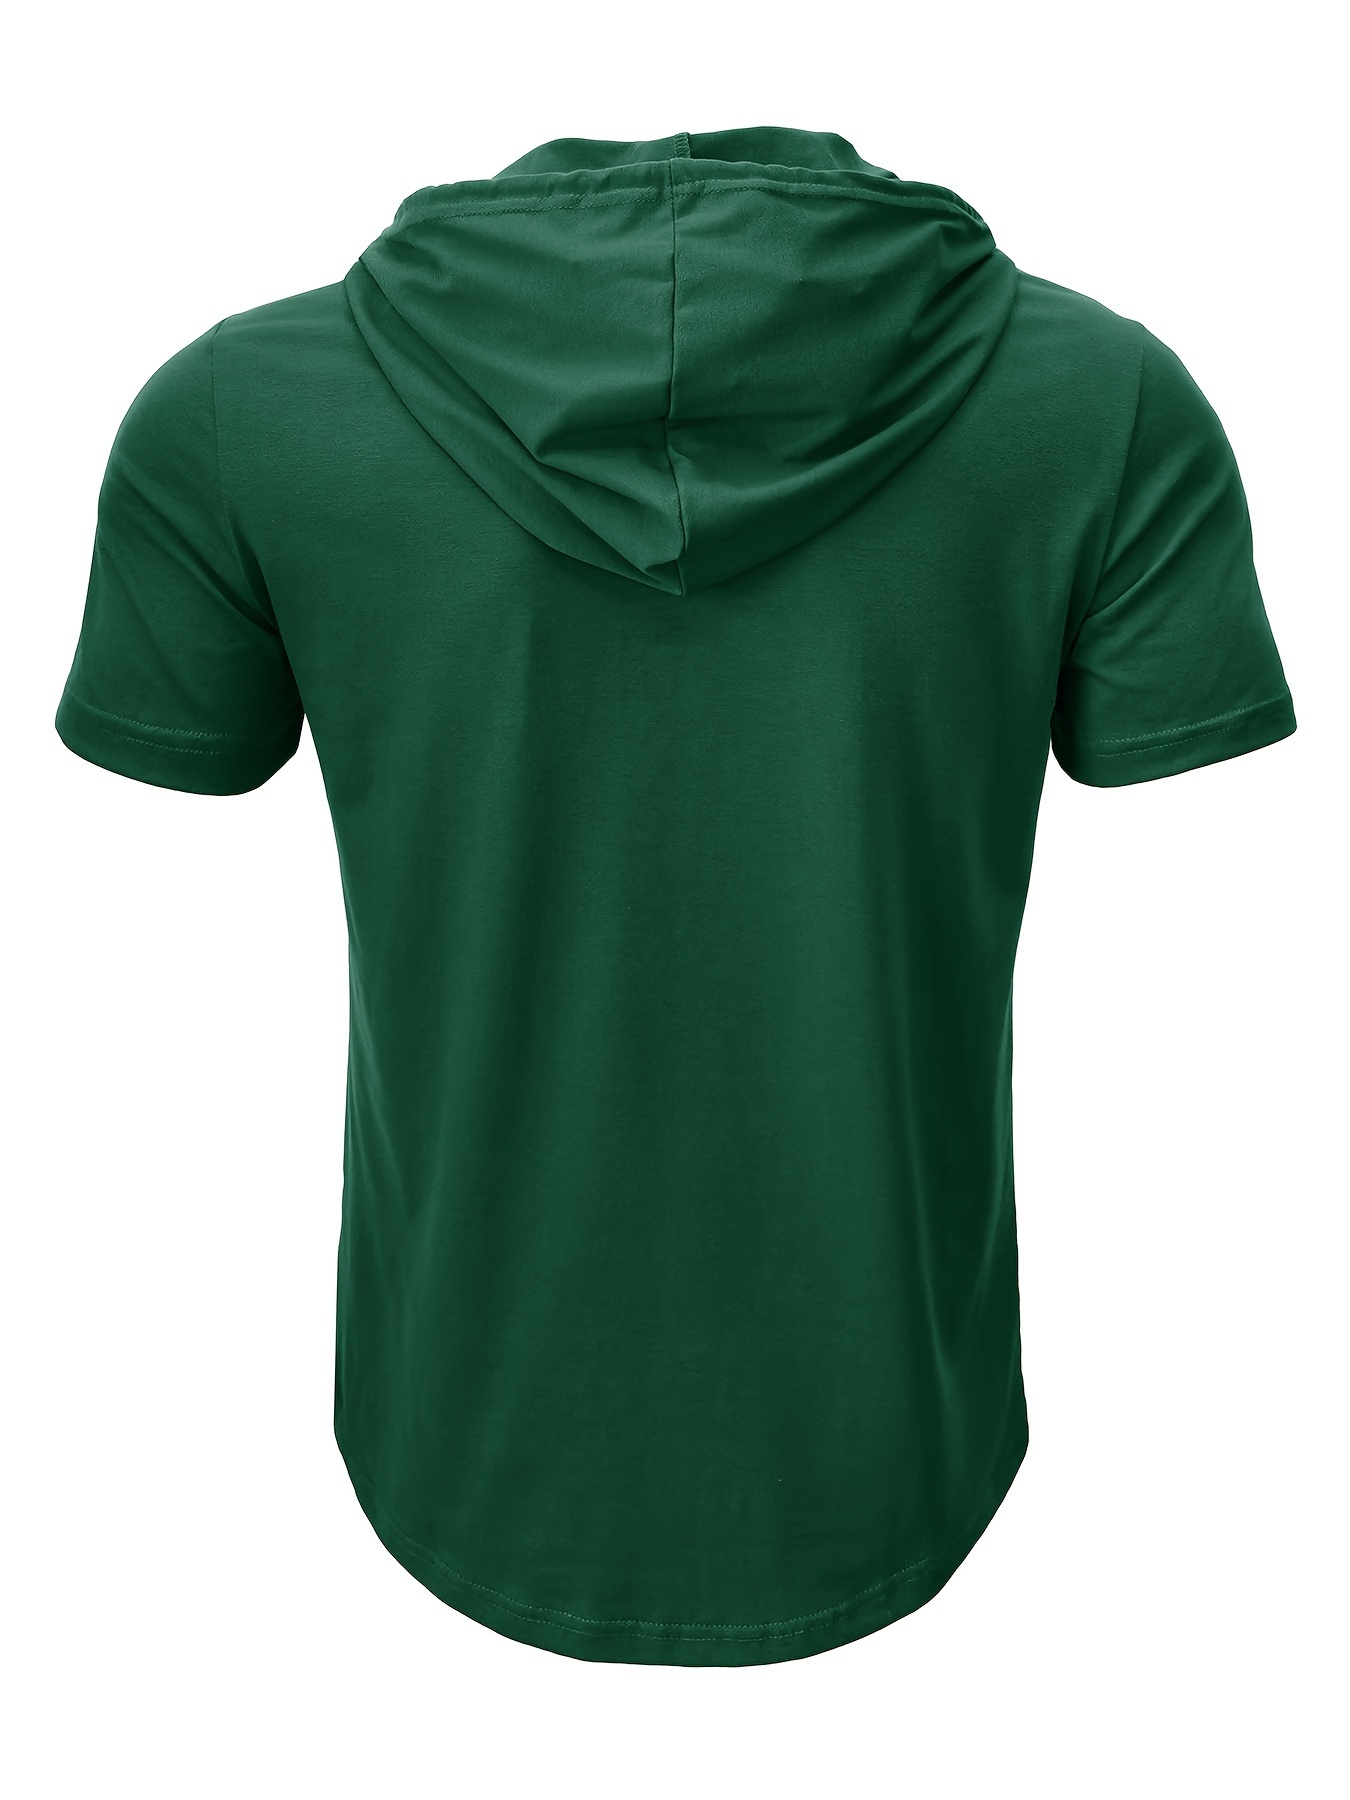 mens solid drawstring hooded short sleeve sports t shirt mens cotton blend henley top for summer outdoor details 18